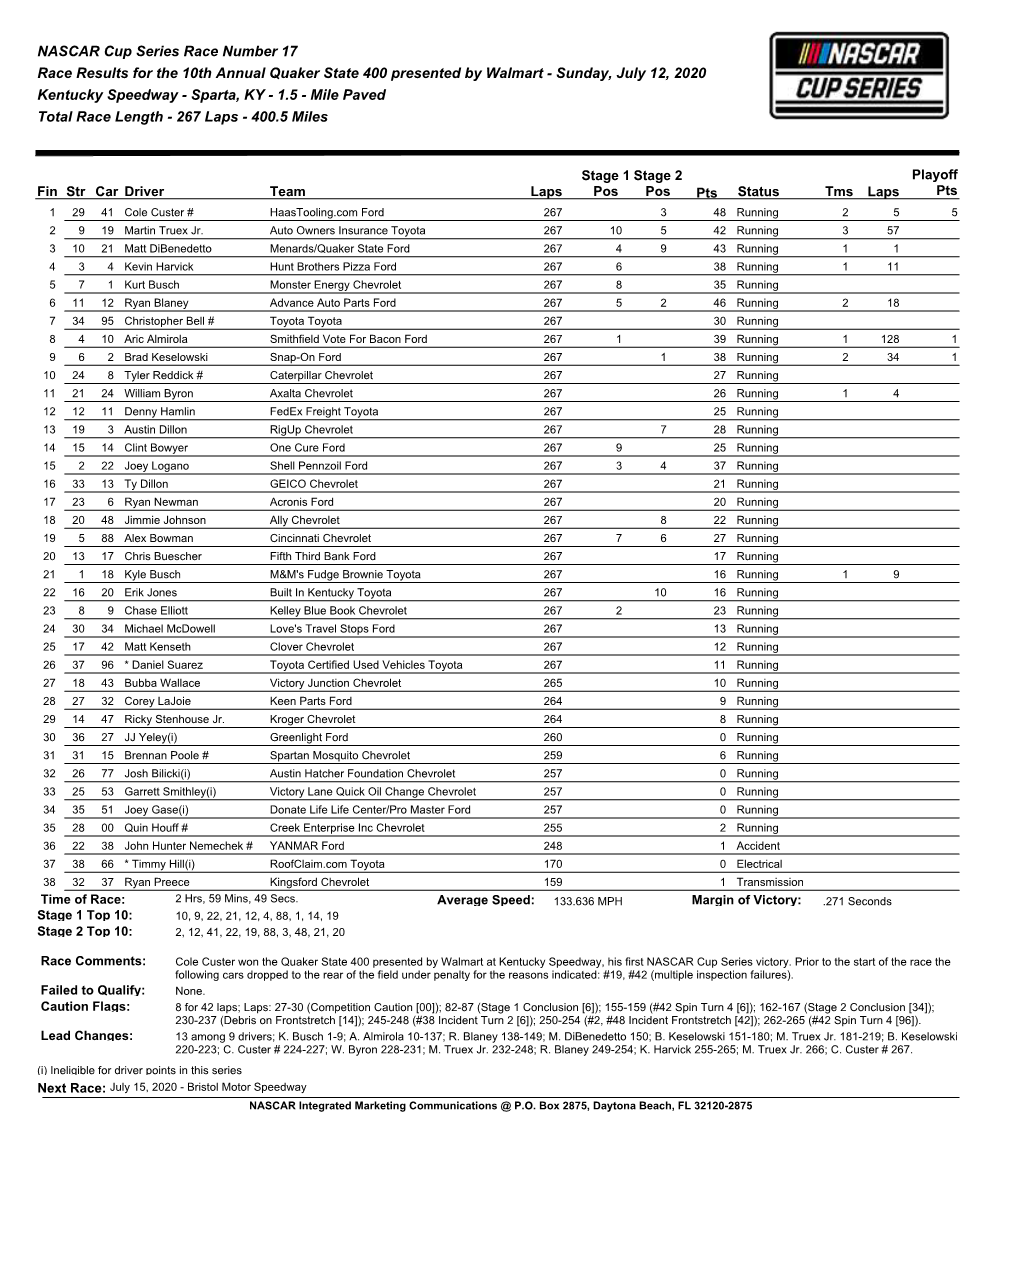 NASCAR Cup Series Race Number 17 Race Results for the 10Th